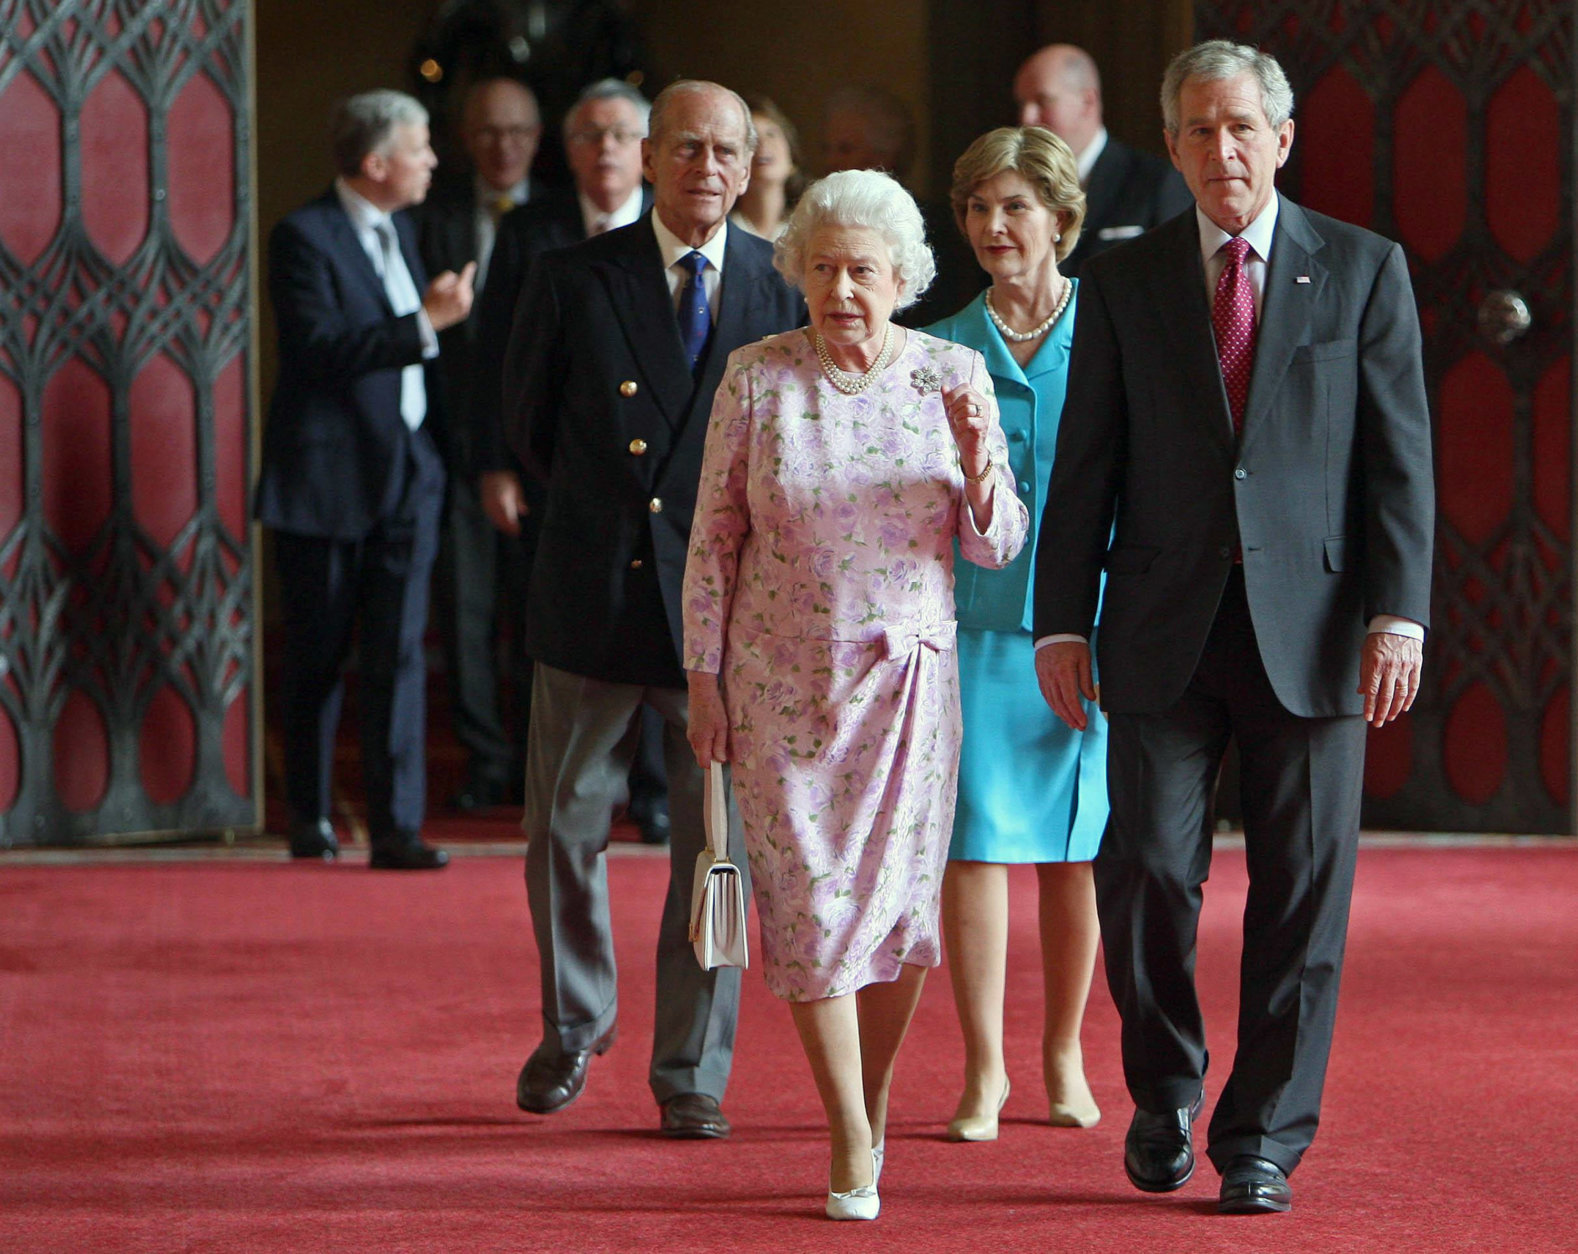 Britain's Queen Elizabeth II and the Duke of Edinburgh, left, with US President George Bush and his wife Laura, behind,   in St George's Hall, Windsor Castle Sunday June 15, 2008. Heading into two days of talks, U.S. President George W. Bush and British Prime Minister Gordon Brown plan to swap strategies on how to reduce their military forces in Iraq and halt Iran's nuclear ambitions. The two leaders will also discuss Middle East peace, climate change, trade and Northern Ireland governance, Bush's national security adviser Stephen Hadley told reporters traveling with the president on Sunday. (AP Photo / Dominic Liplinski, Pool)